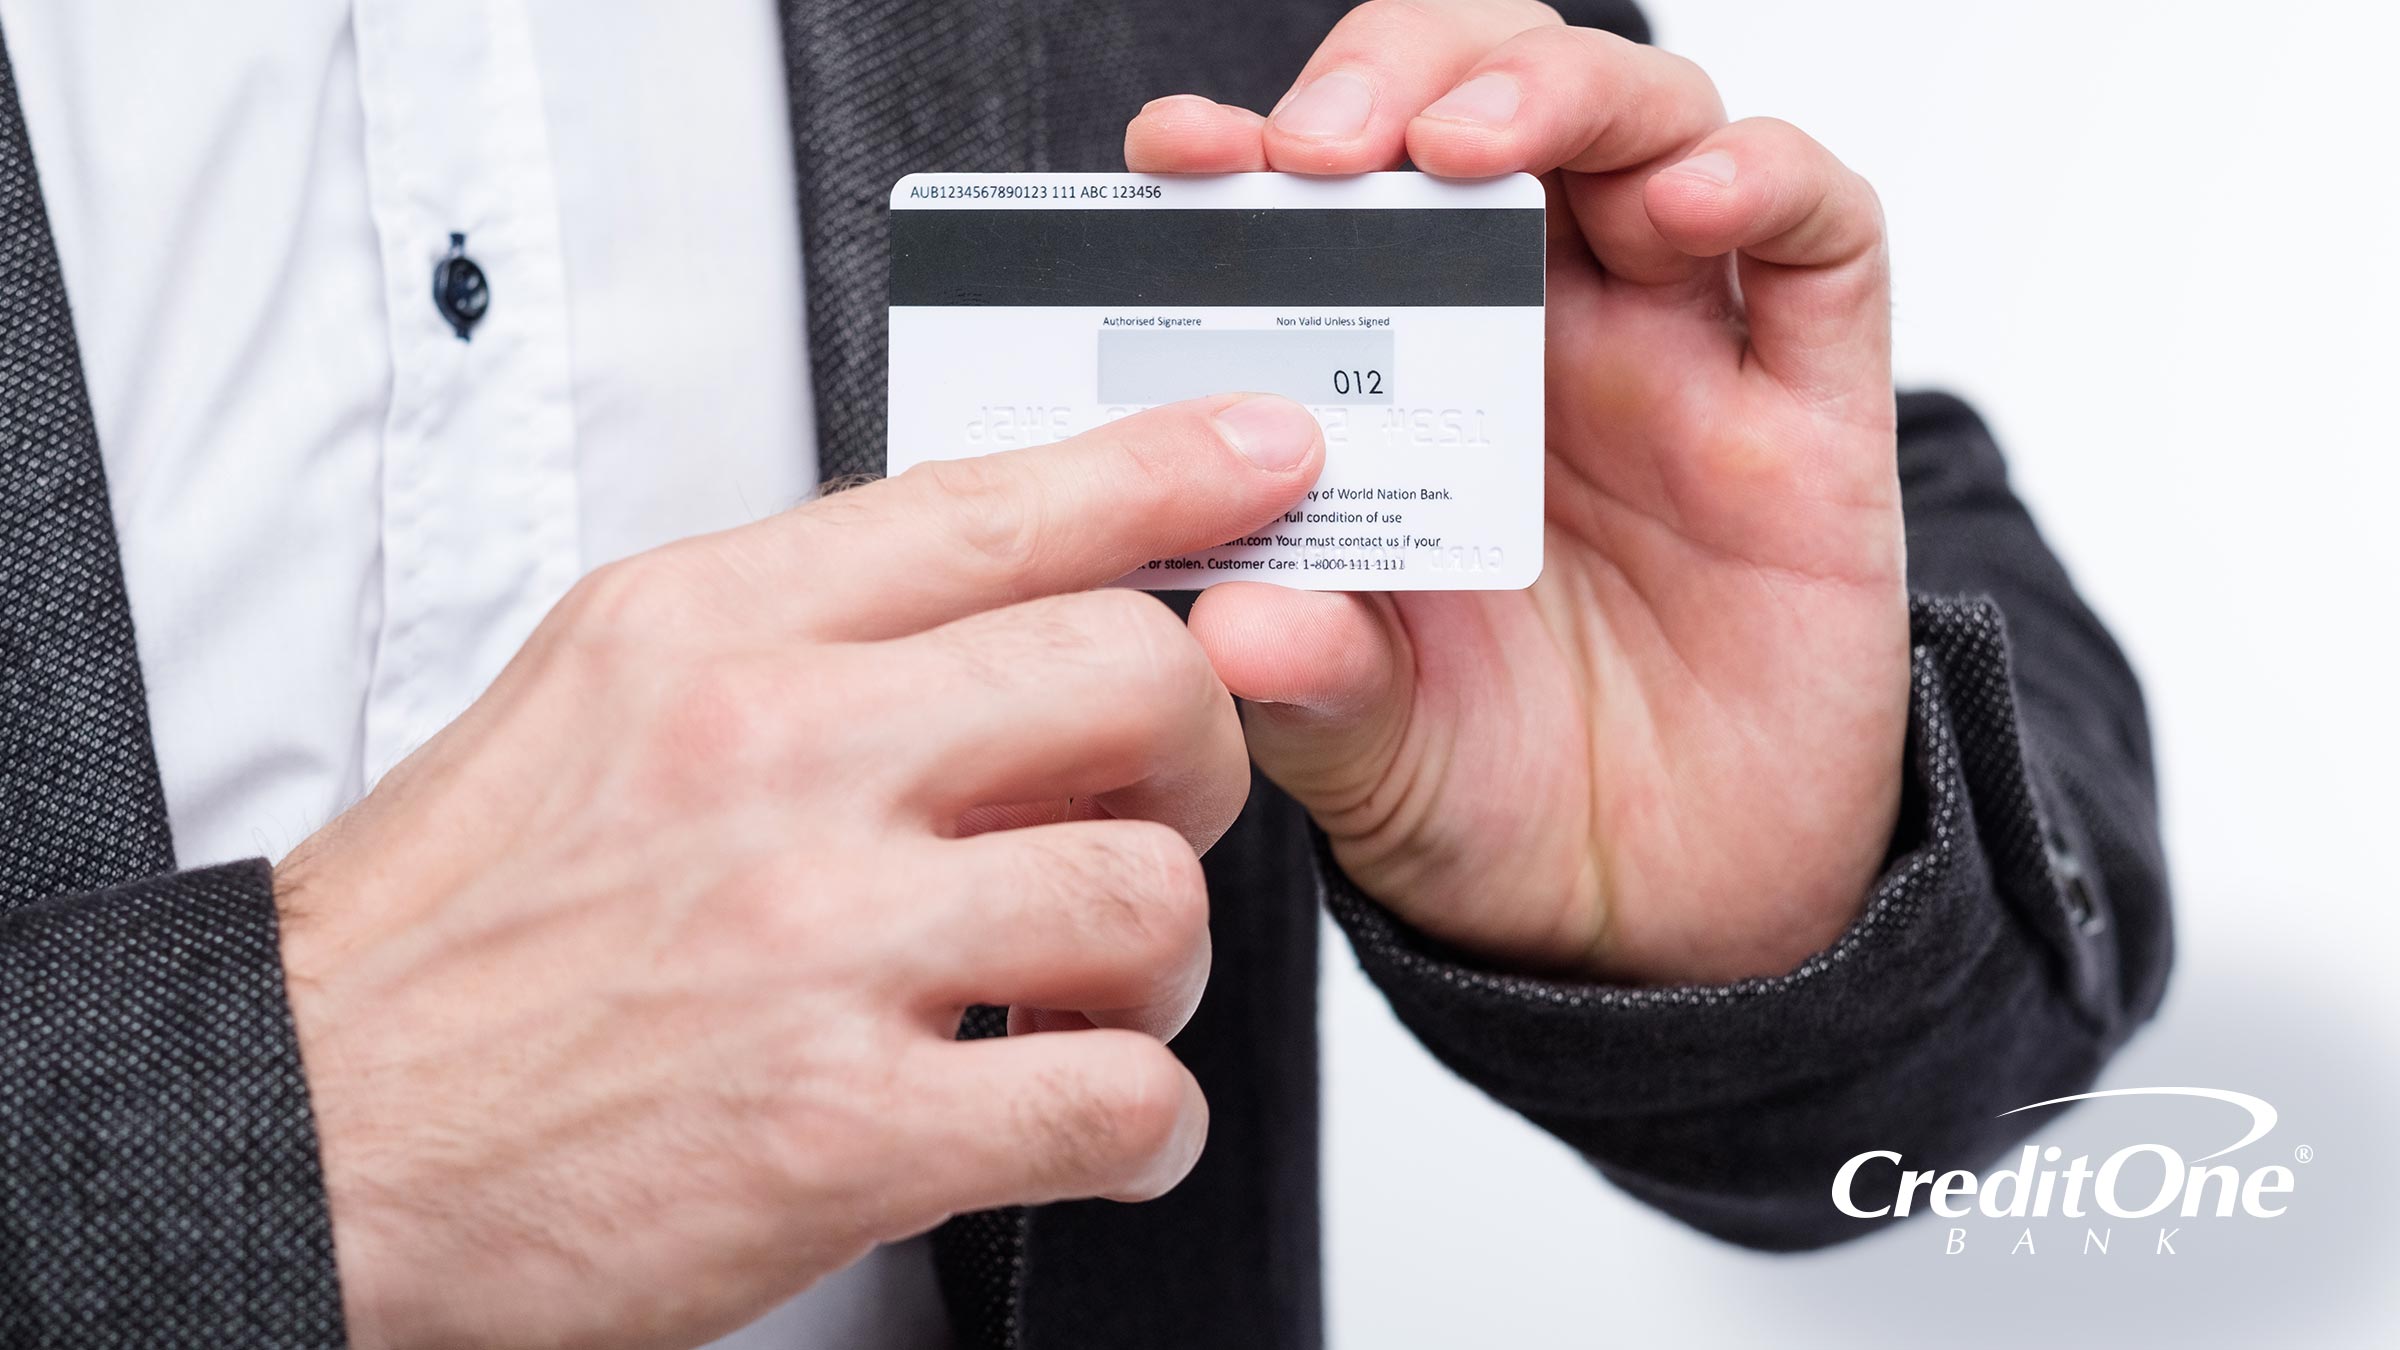 Credit card CVVs (card verification values) are an added layer of security for protection against fraud. Learn more in this article by Credit One Bank.